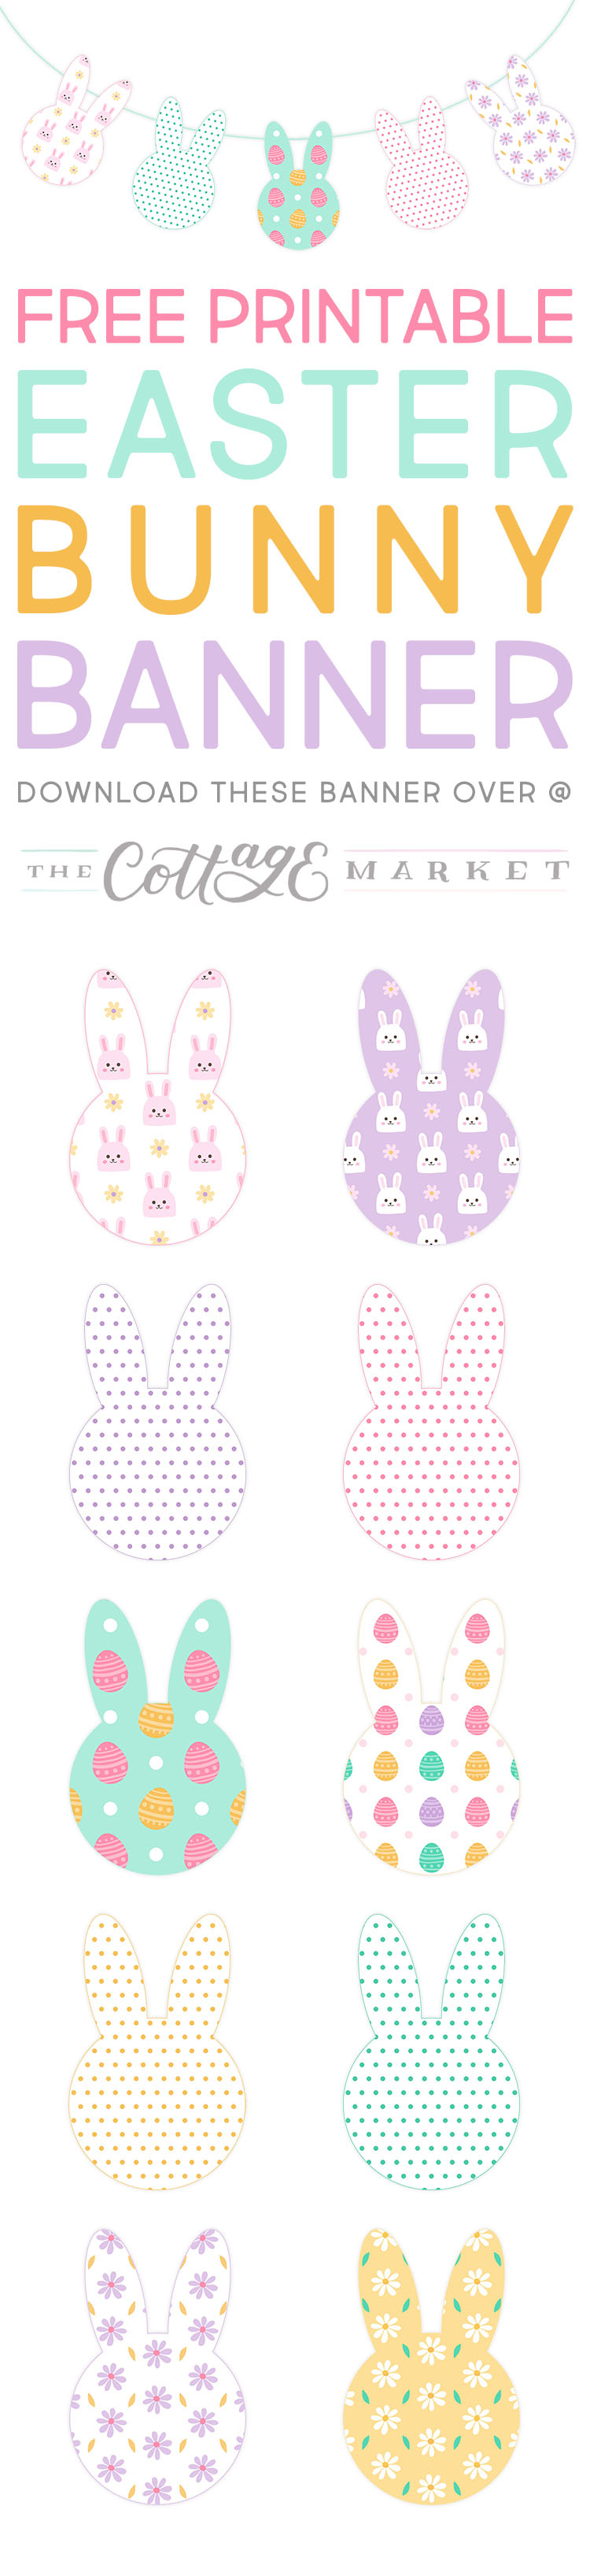 Free Printable Easter Bunny Banner - The Cottage Market - Free Printable Easter Decorations